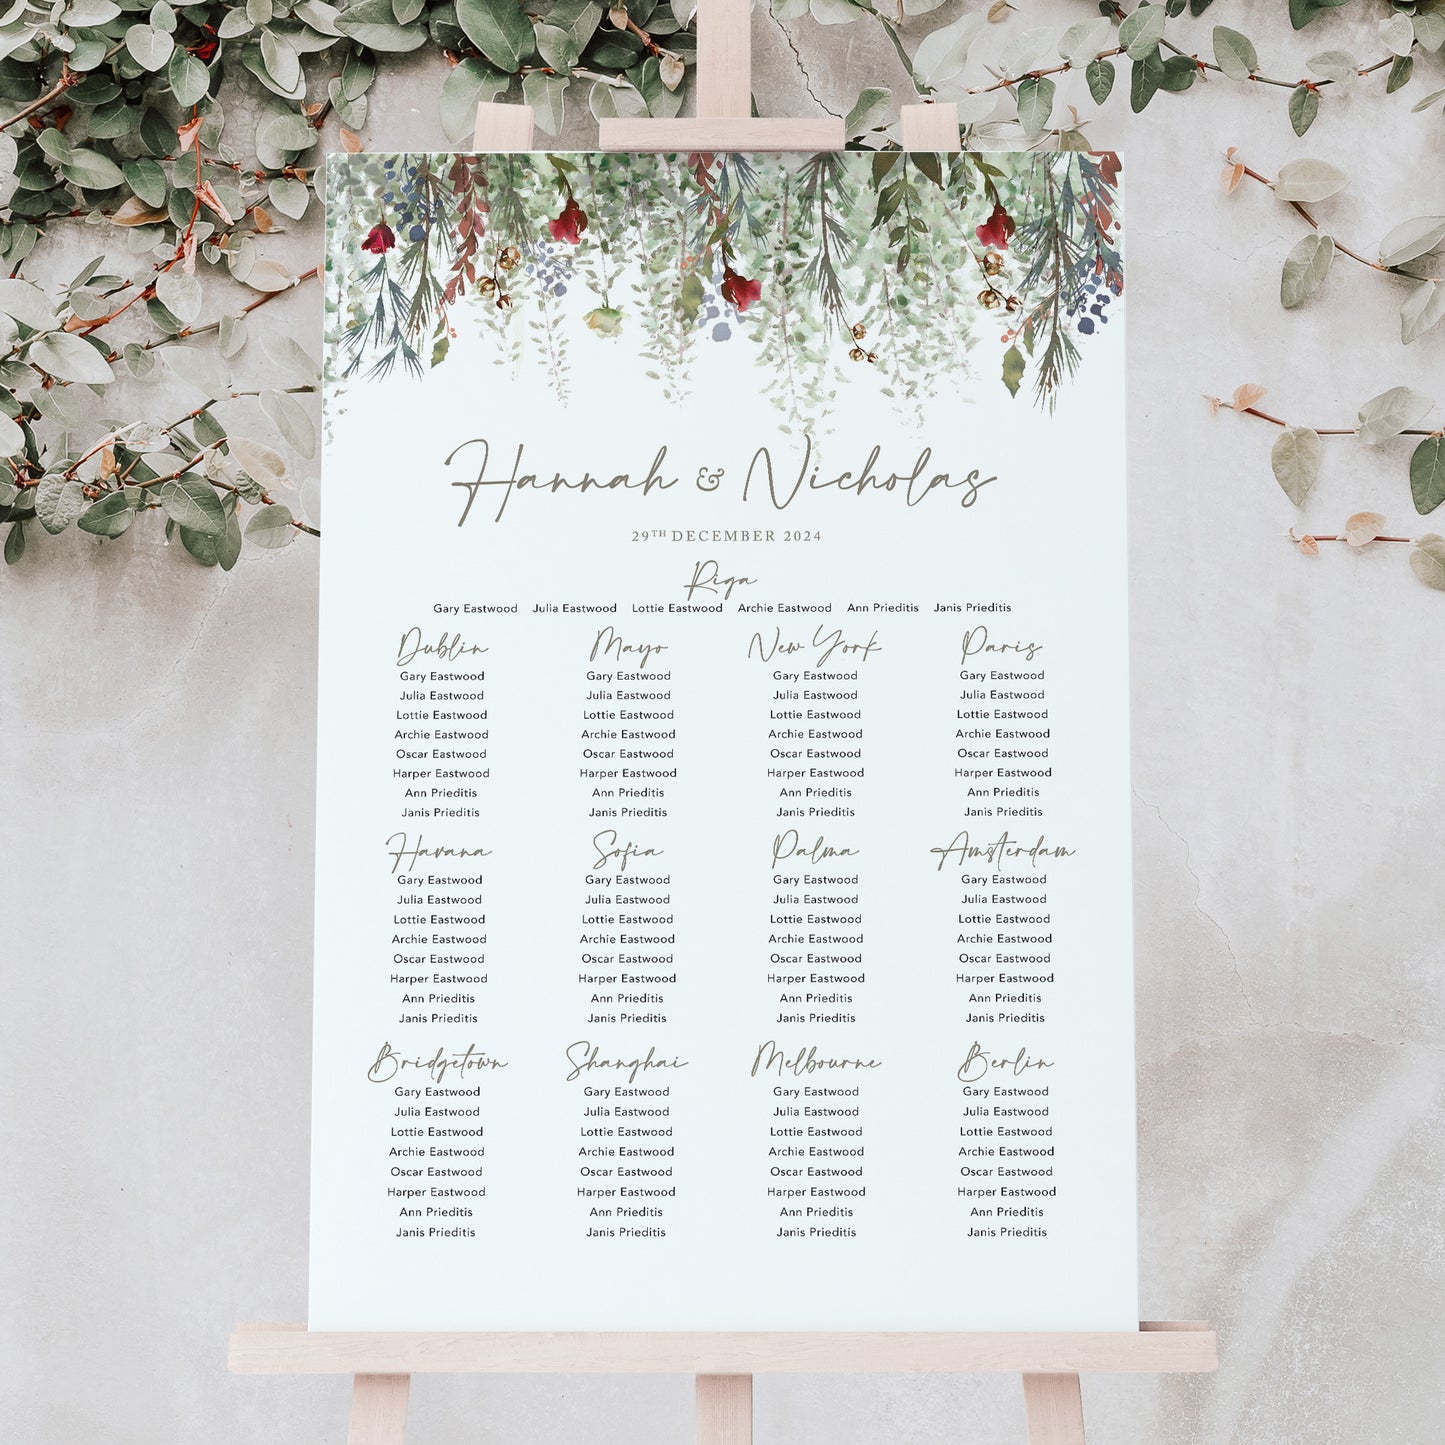 Table Plan for a Christmas wedding with green foliage and red flowers